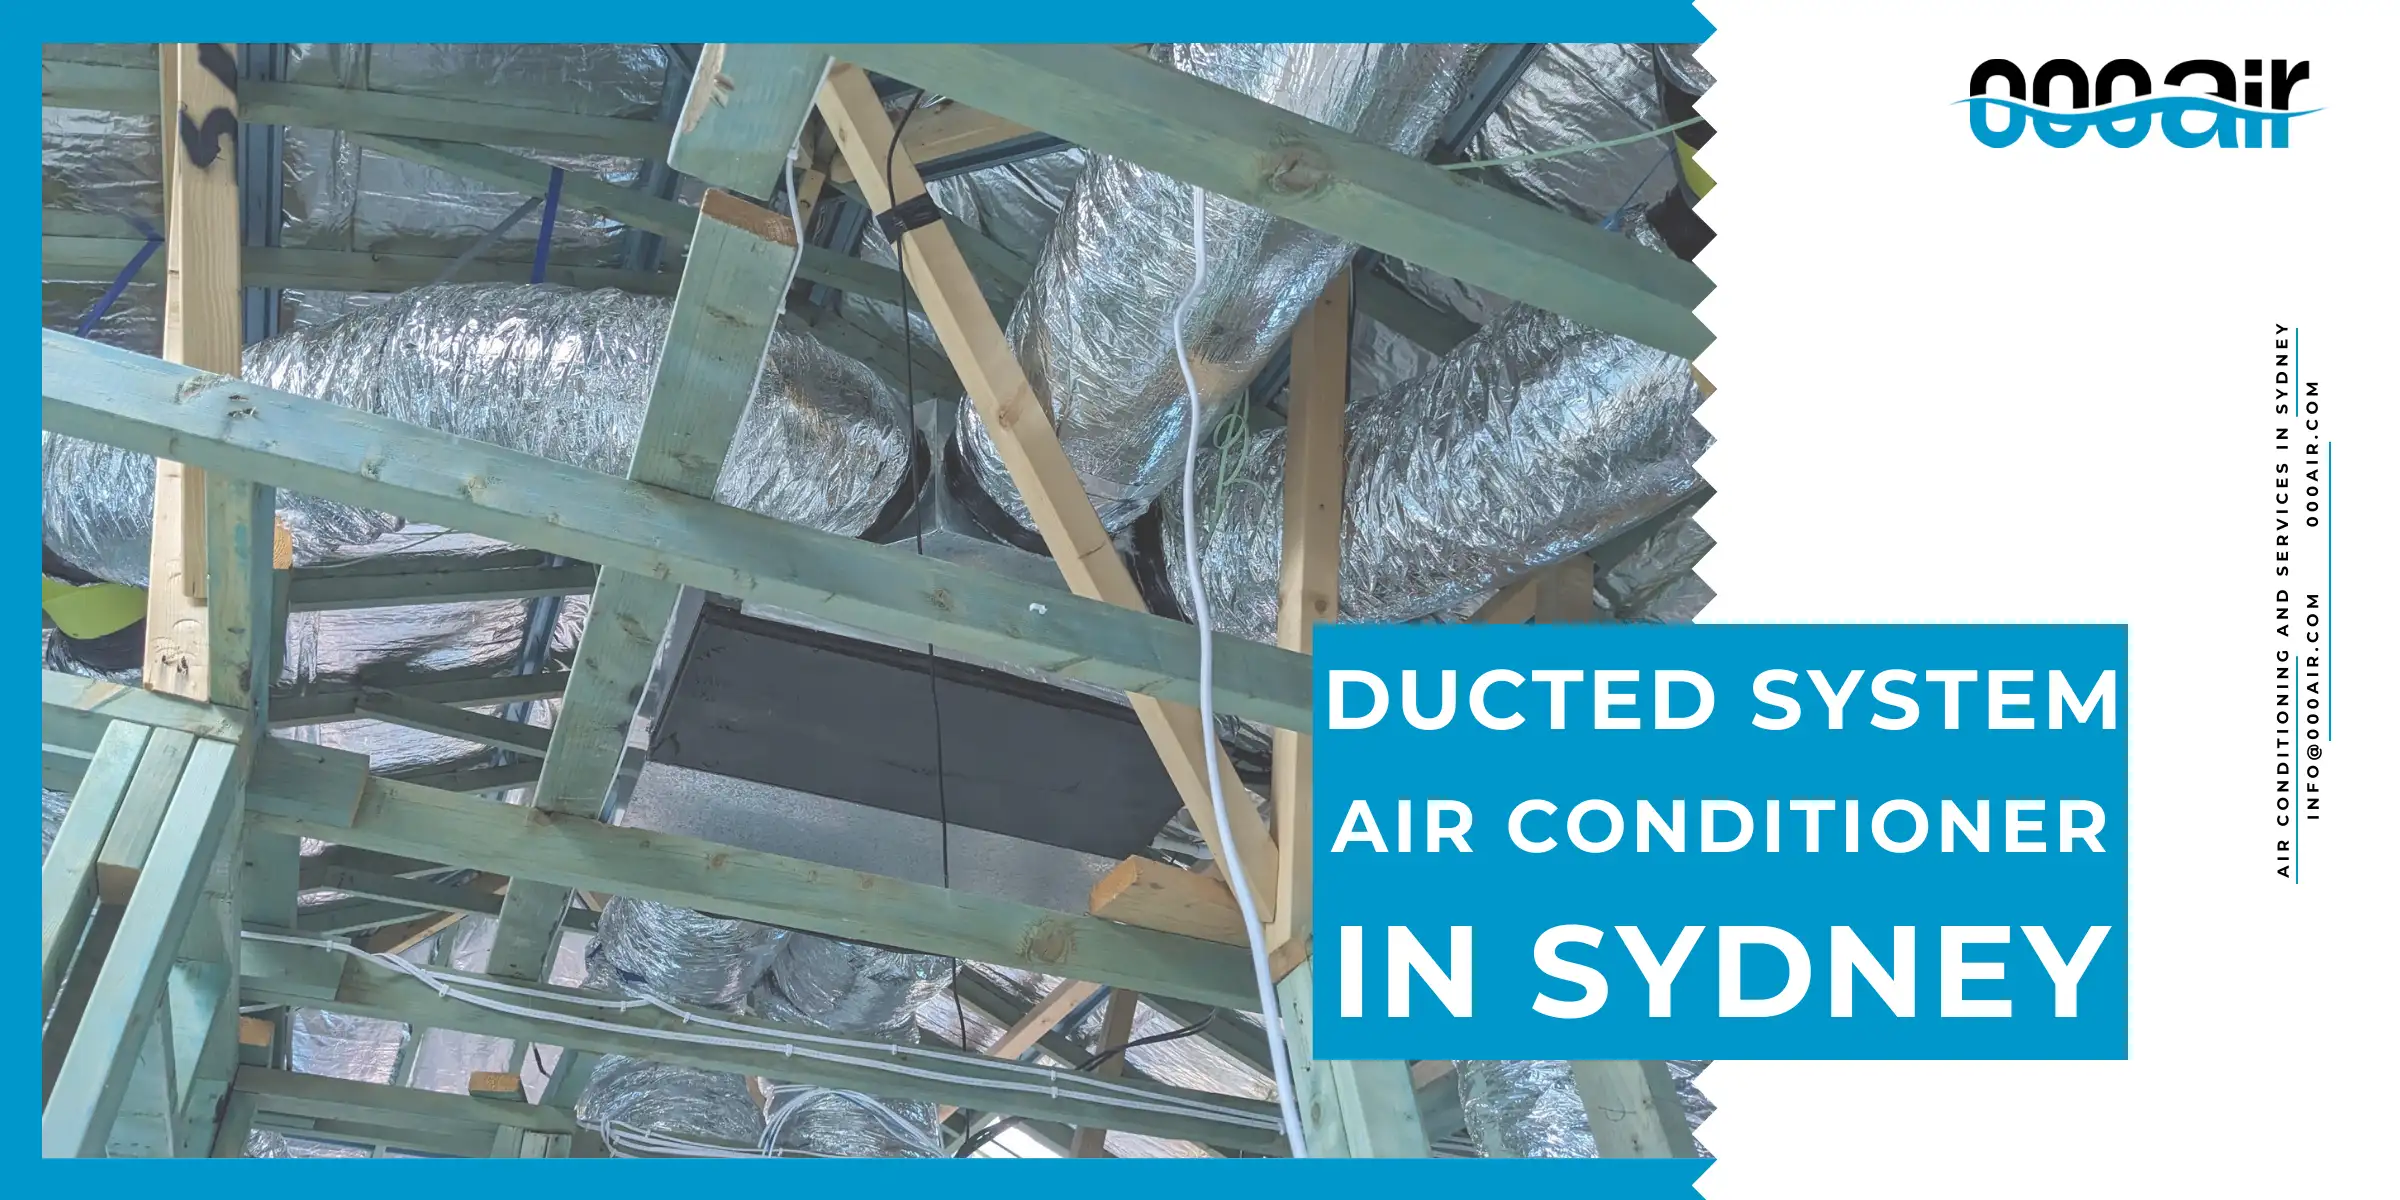 ducted system air conditioner